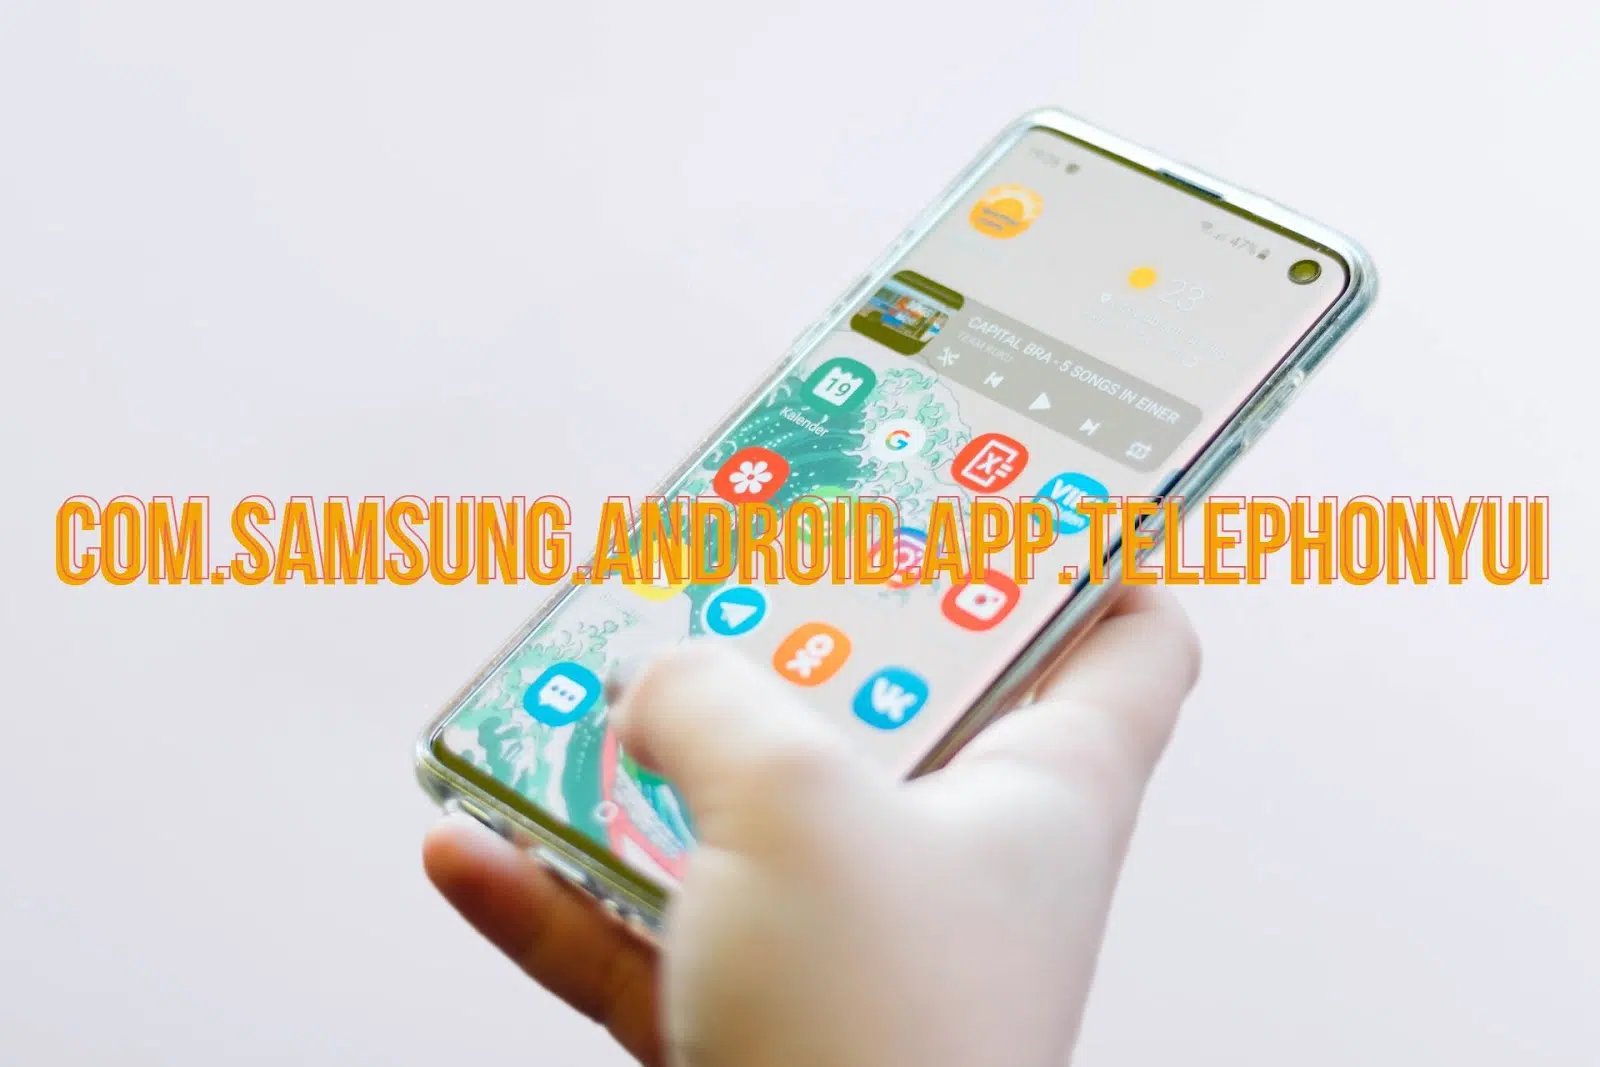 What Is com.samsung.android.app.telephonyui?